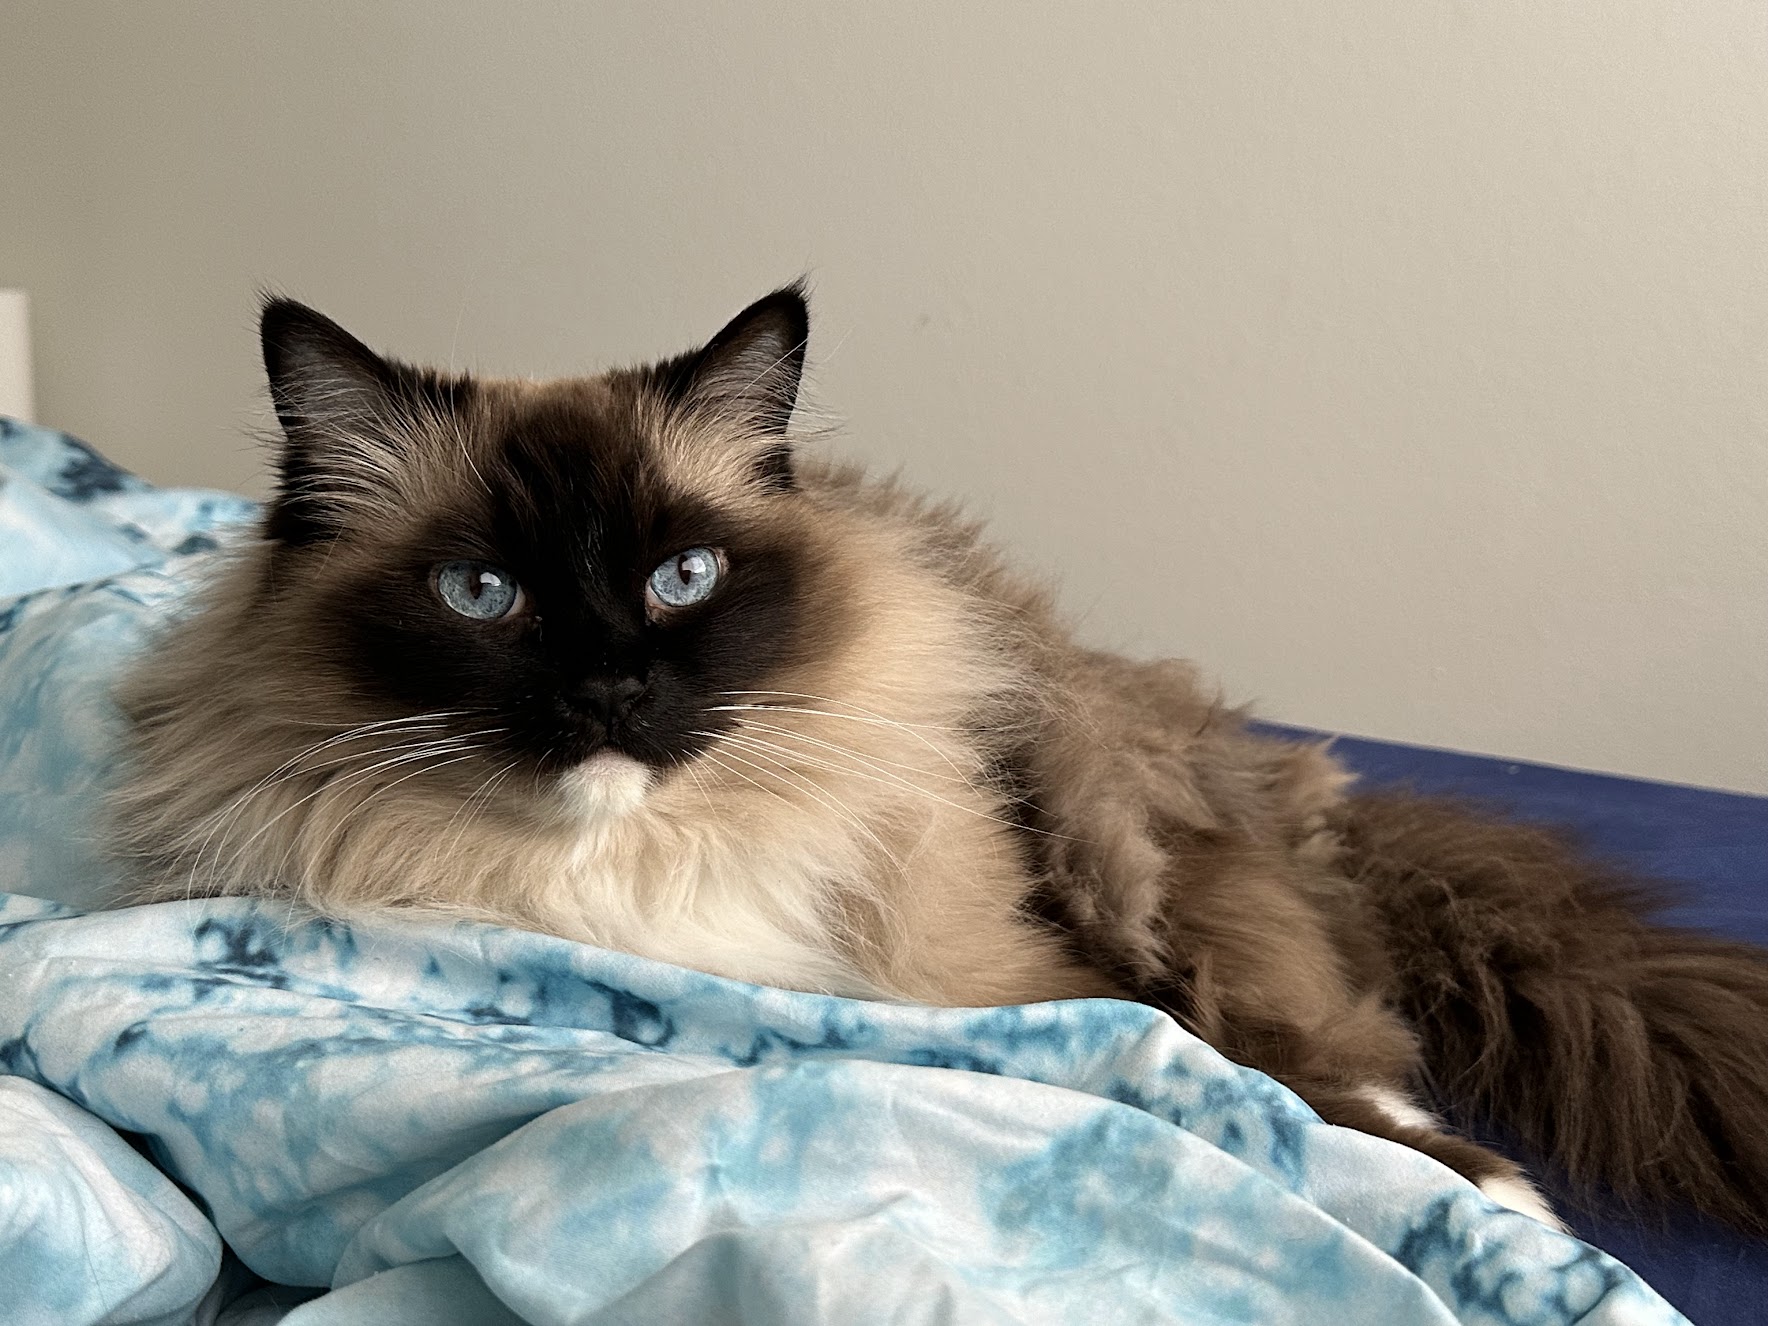 A very fluffy and regal looking cat named Mochi. She has a mixture of dark brown fur and white fur, with piercing blue eyes. Her eyes coincidentally match the blanket she is on!